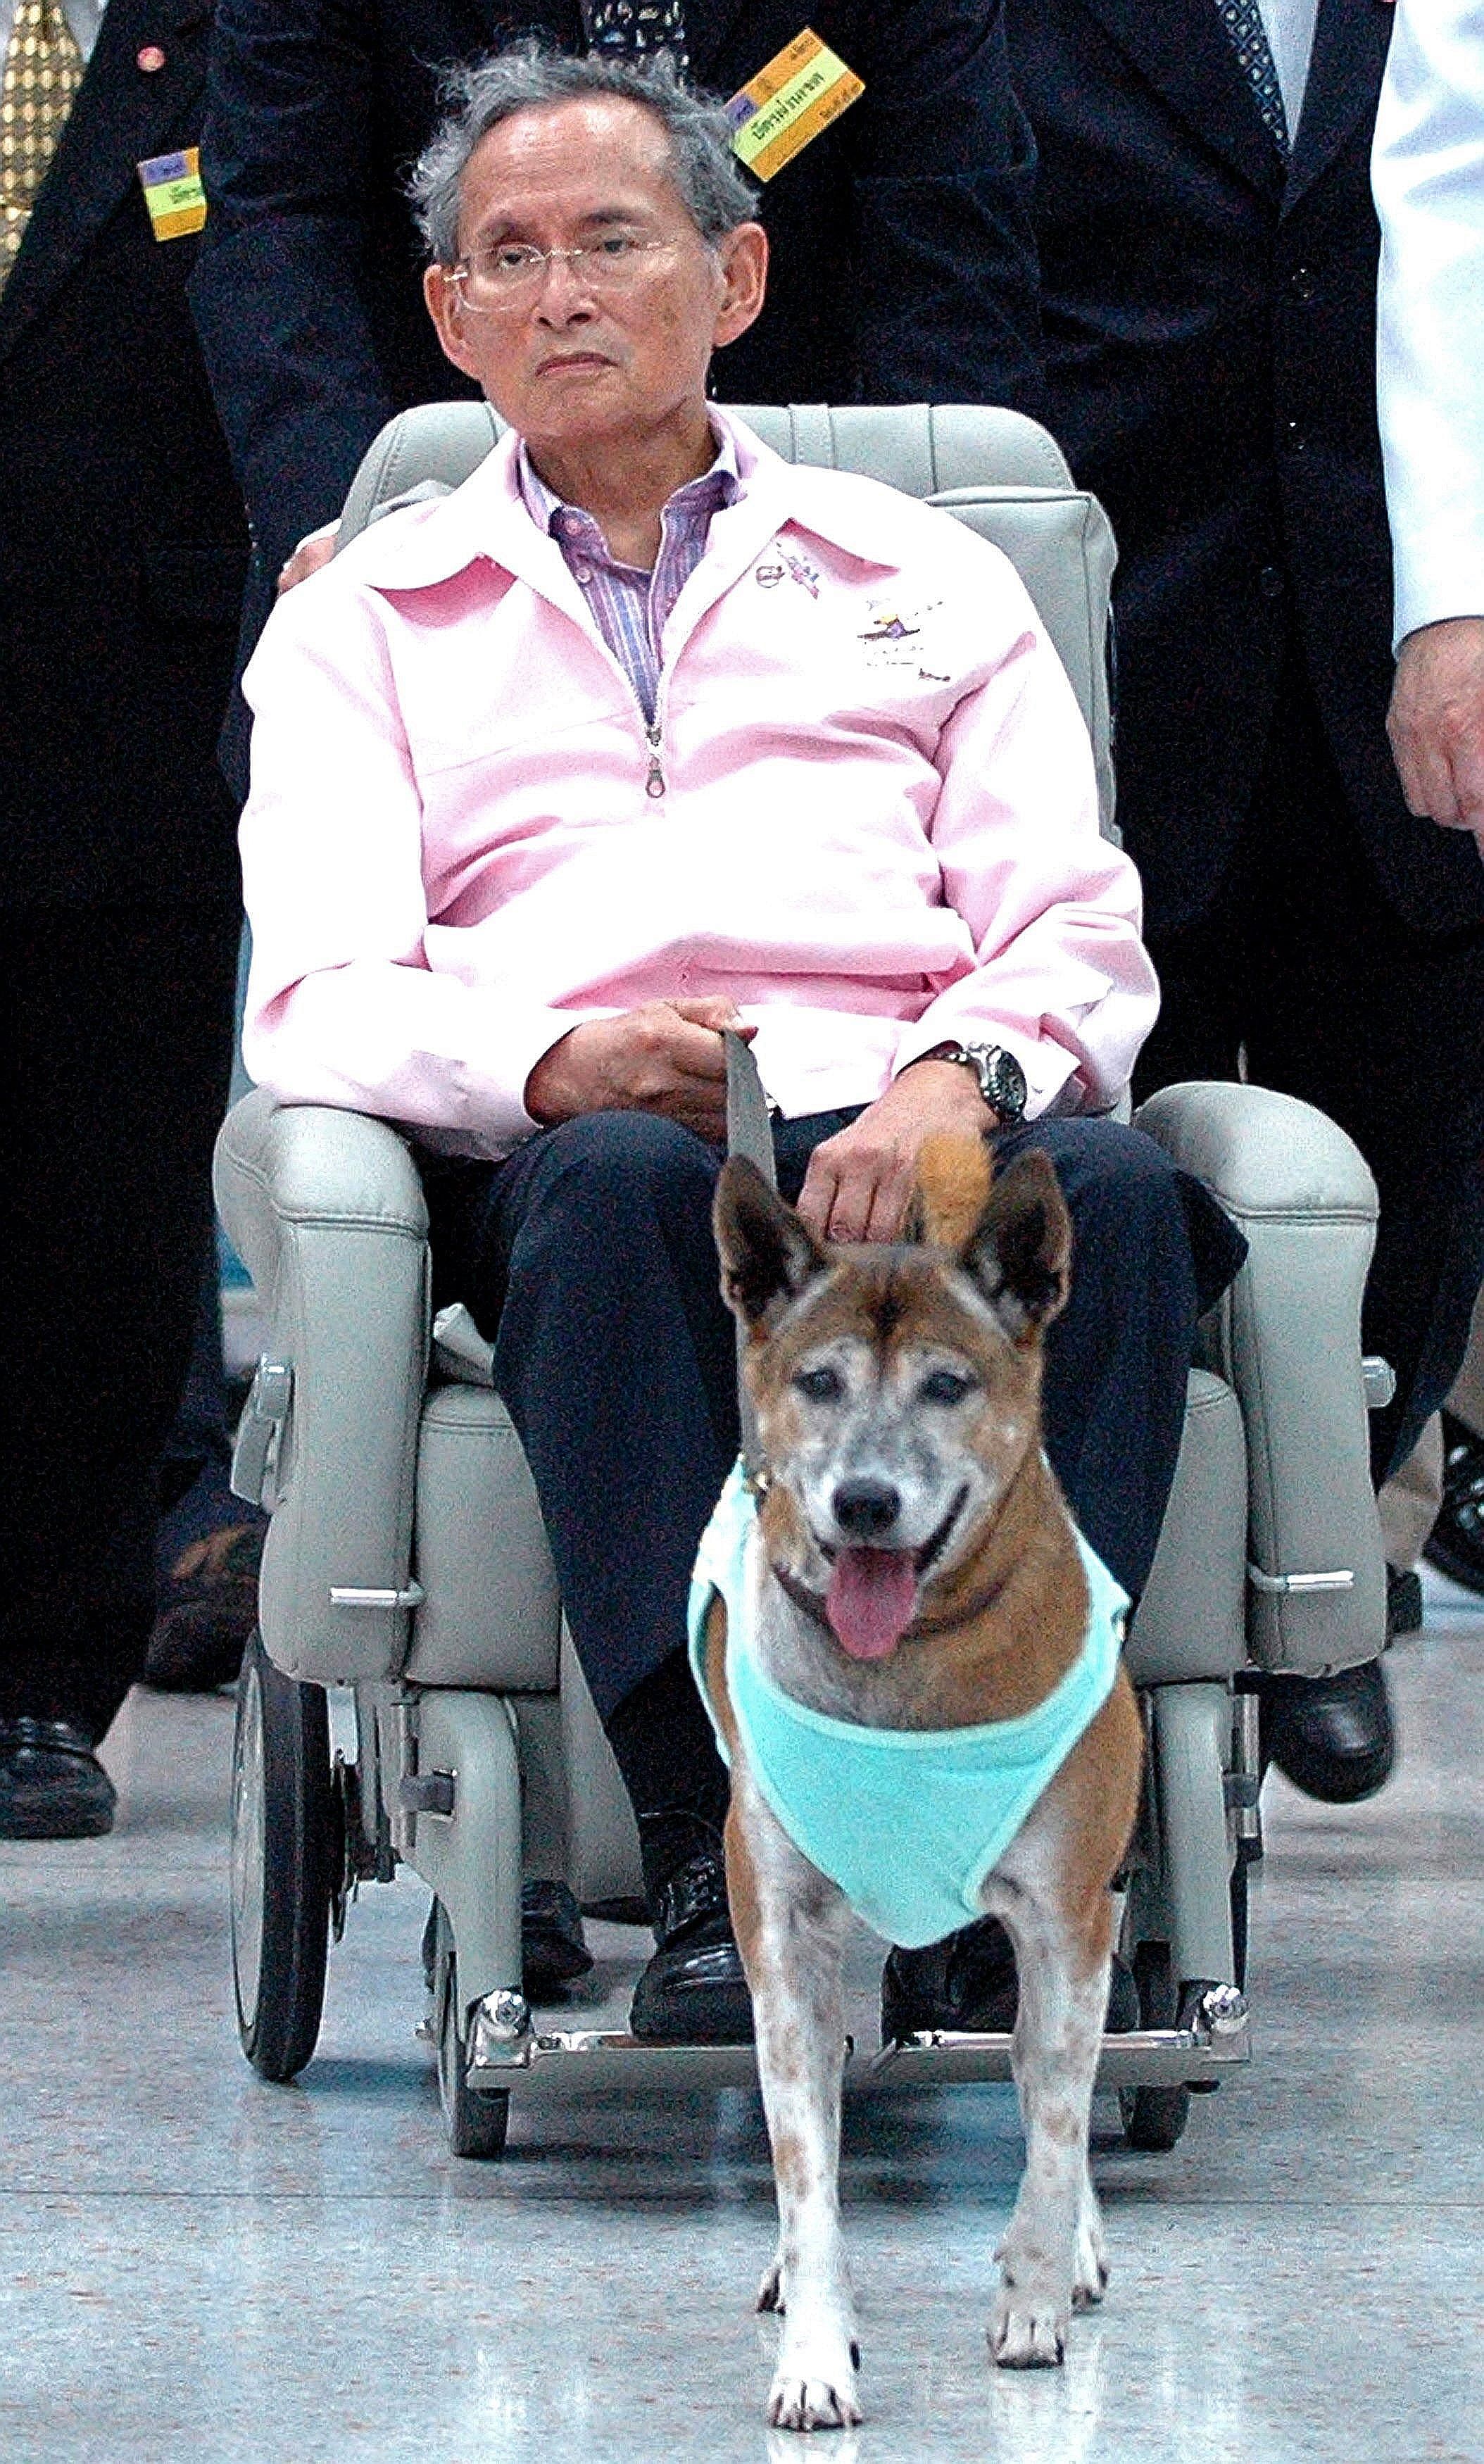 King Bhumibol Adulyadej with his dog Tongdaeng at a hospital in Bangkok in a 2010 photo. Earlier this month, Thai man Thanakorn Siripaiboon, 27, was arrested for allegedly making a "satirical" Facebook post about the King and his dog, according to hi